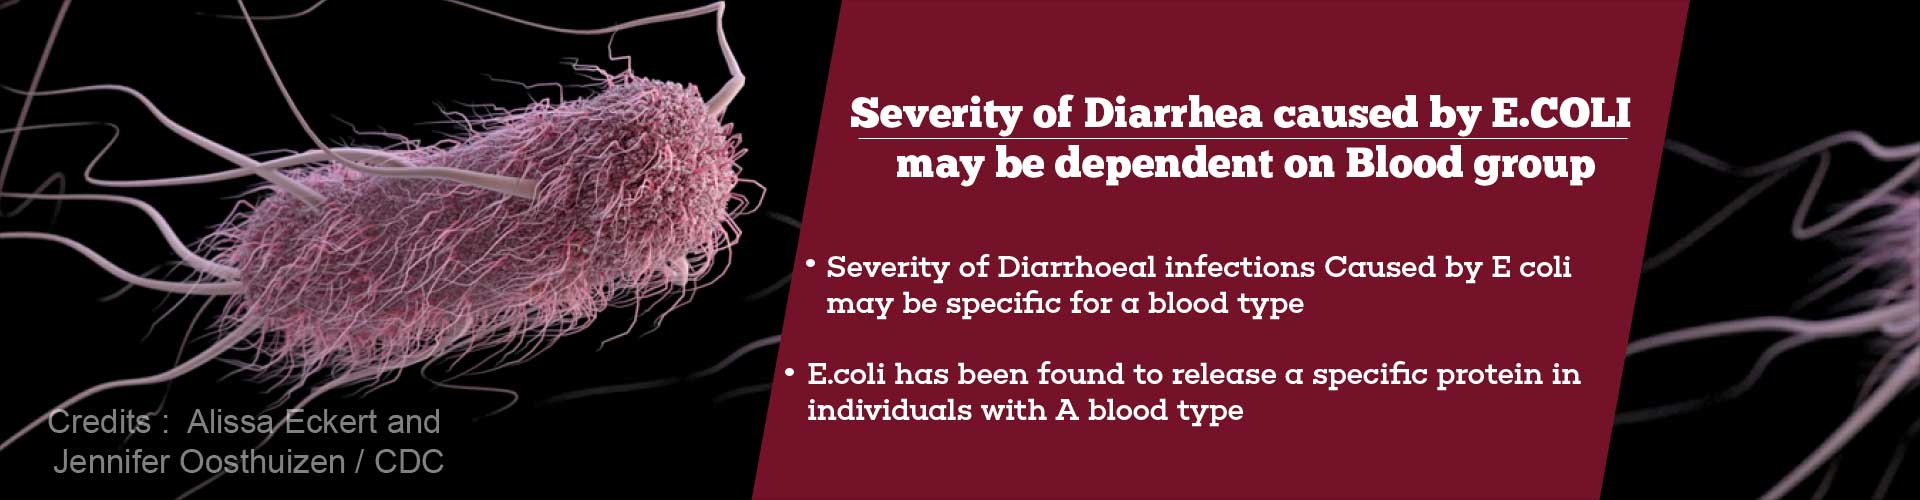 severity of diarrhea caused by ecoli may be dependent in blood group
- severity of diarrheal infections caused by ecoli may be specific for a blood type
- ecoli has been found to release a specific protein in individuals with a blood type